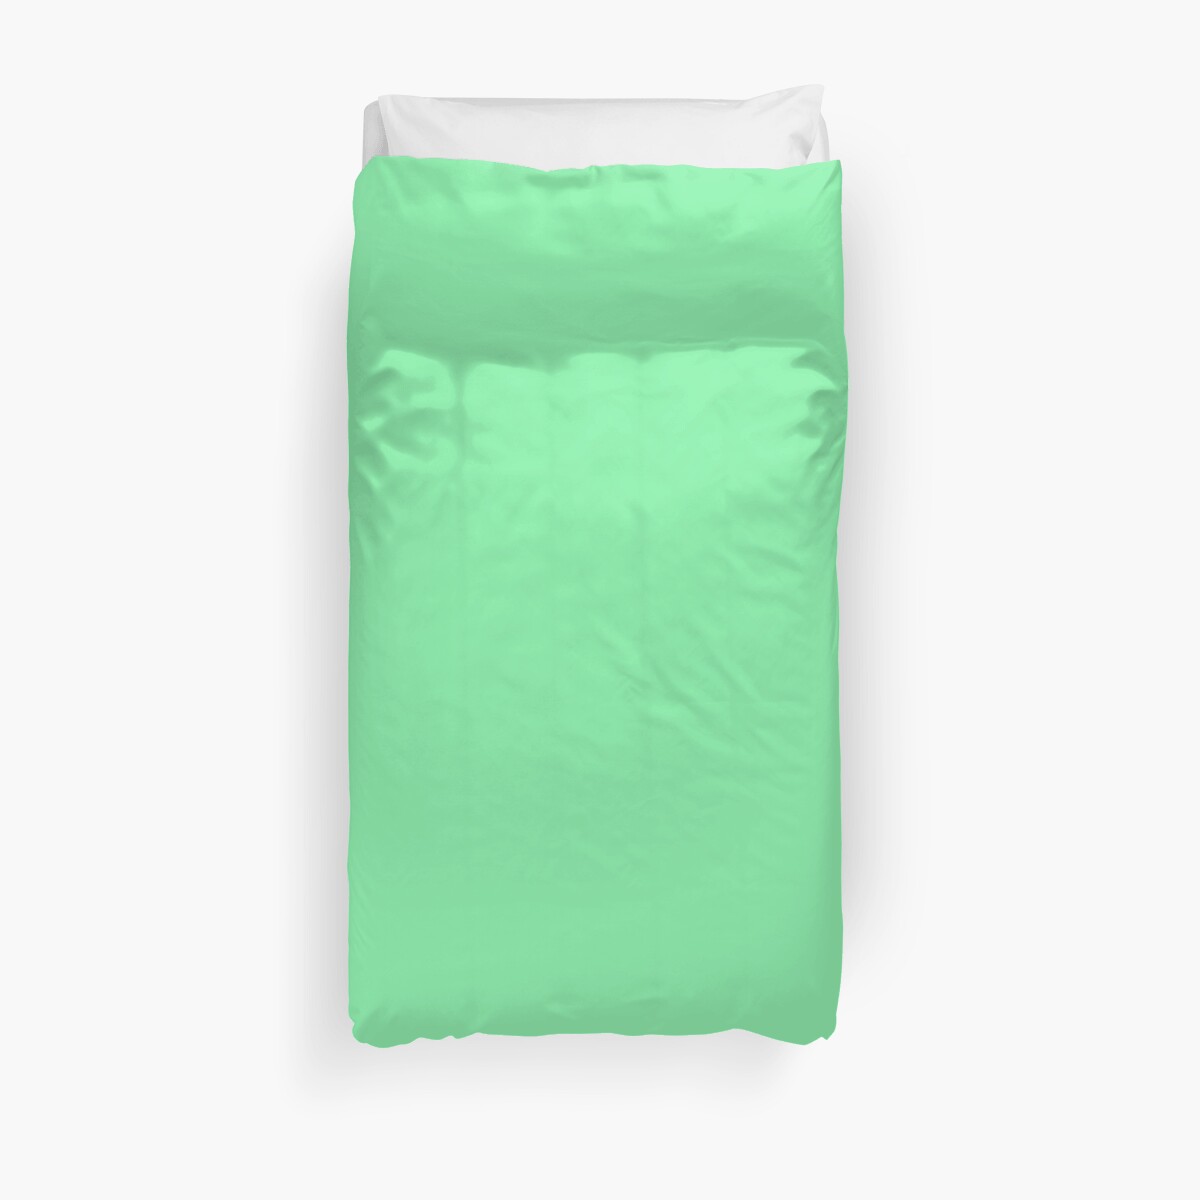 Candy Colors Electric Neon Lime Fluorescent Mint Green Duvet